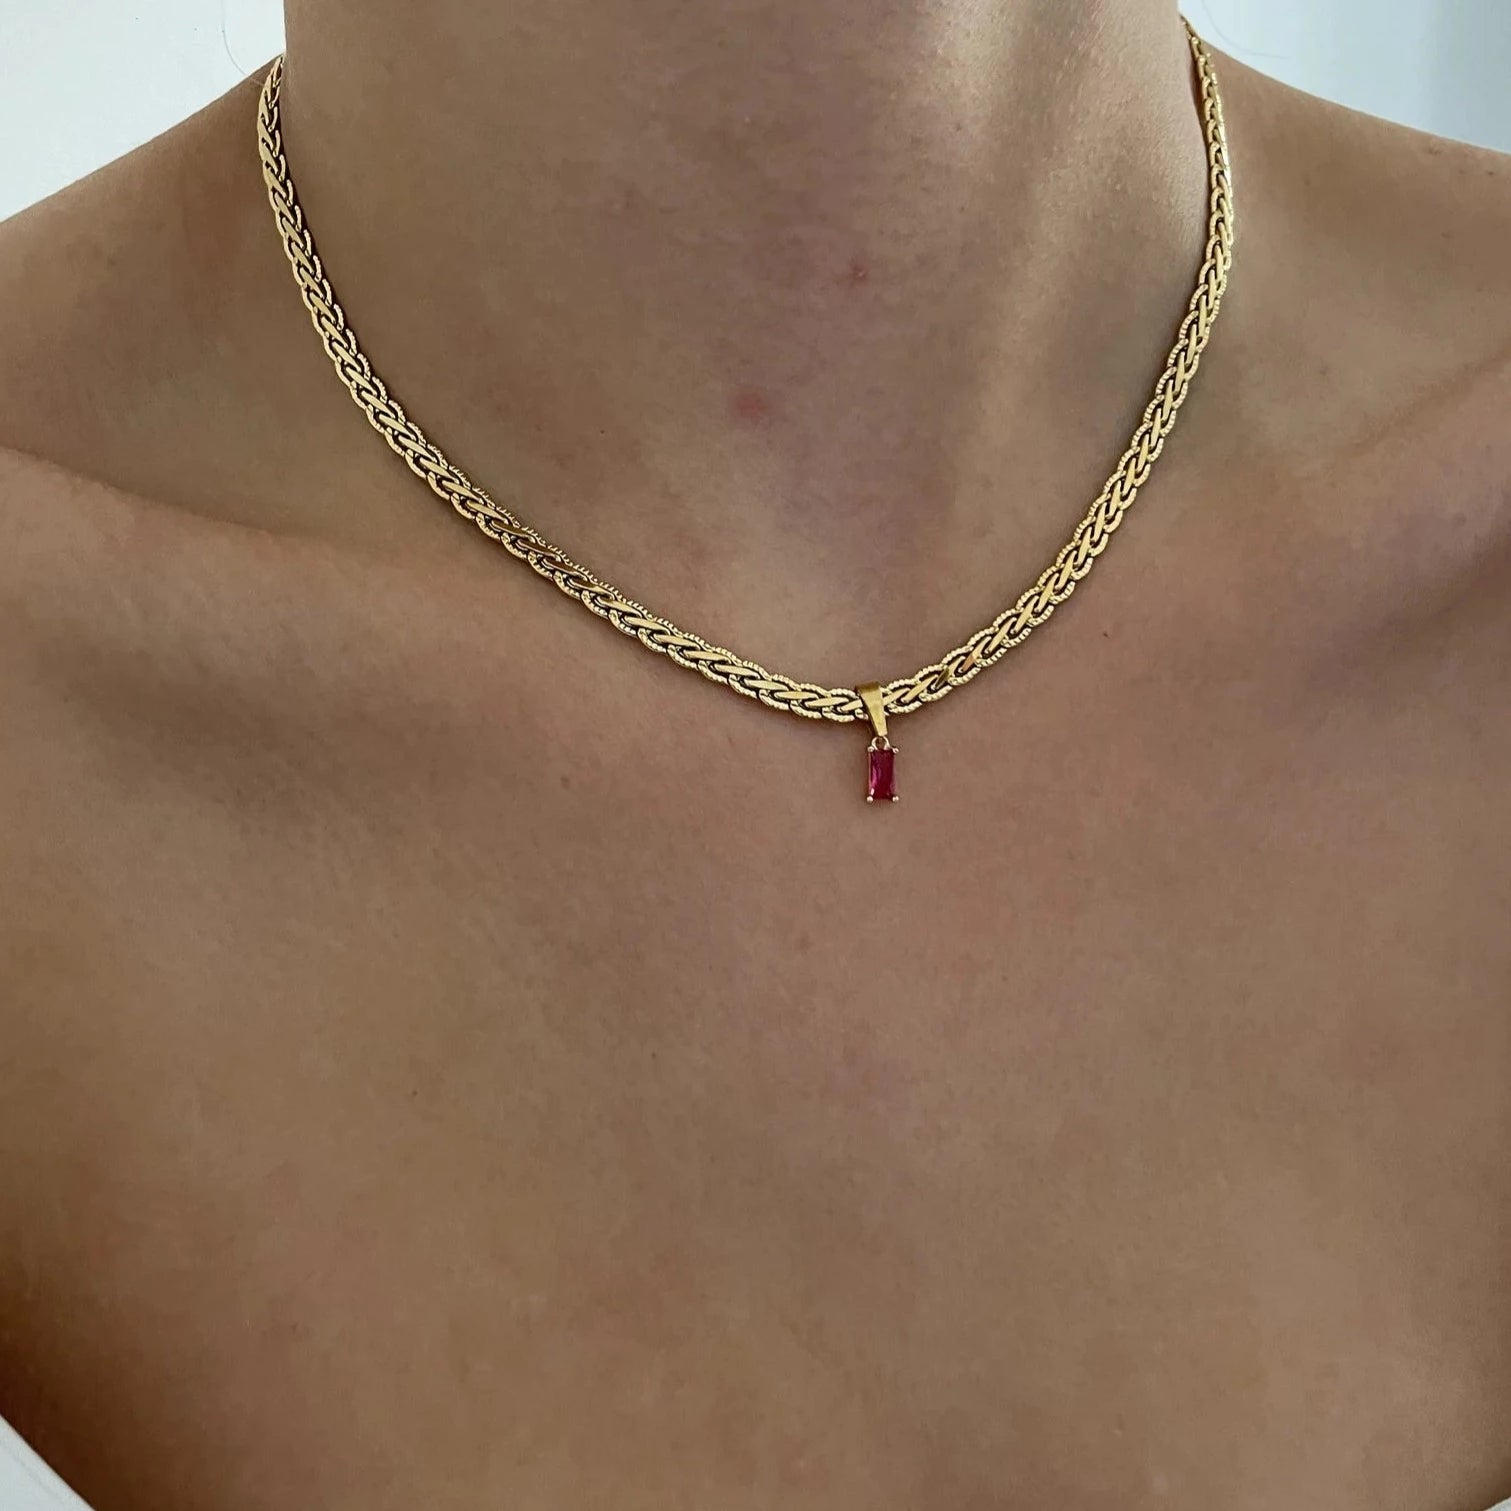 Red Gem Necklace - Cosmic Chains 